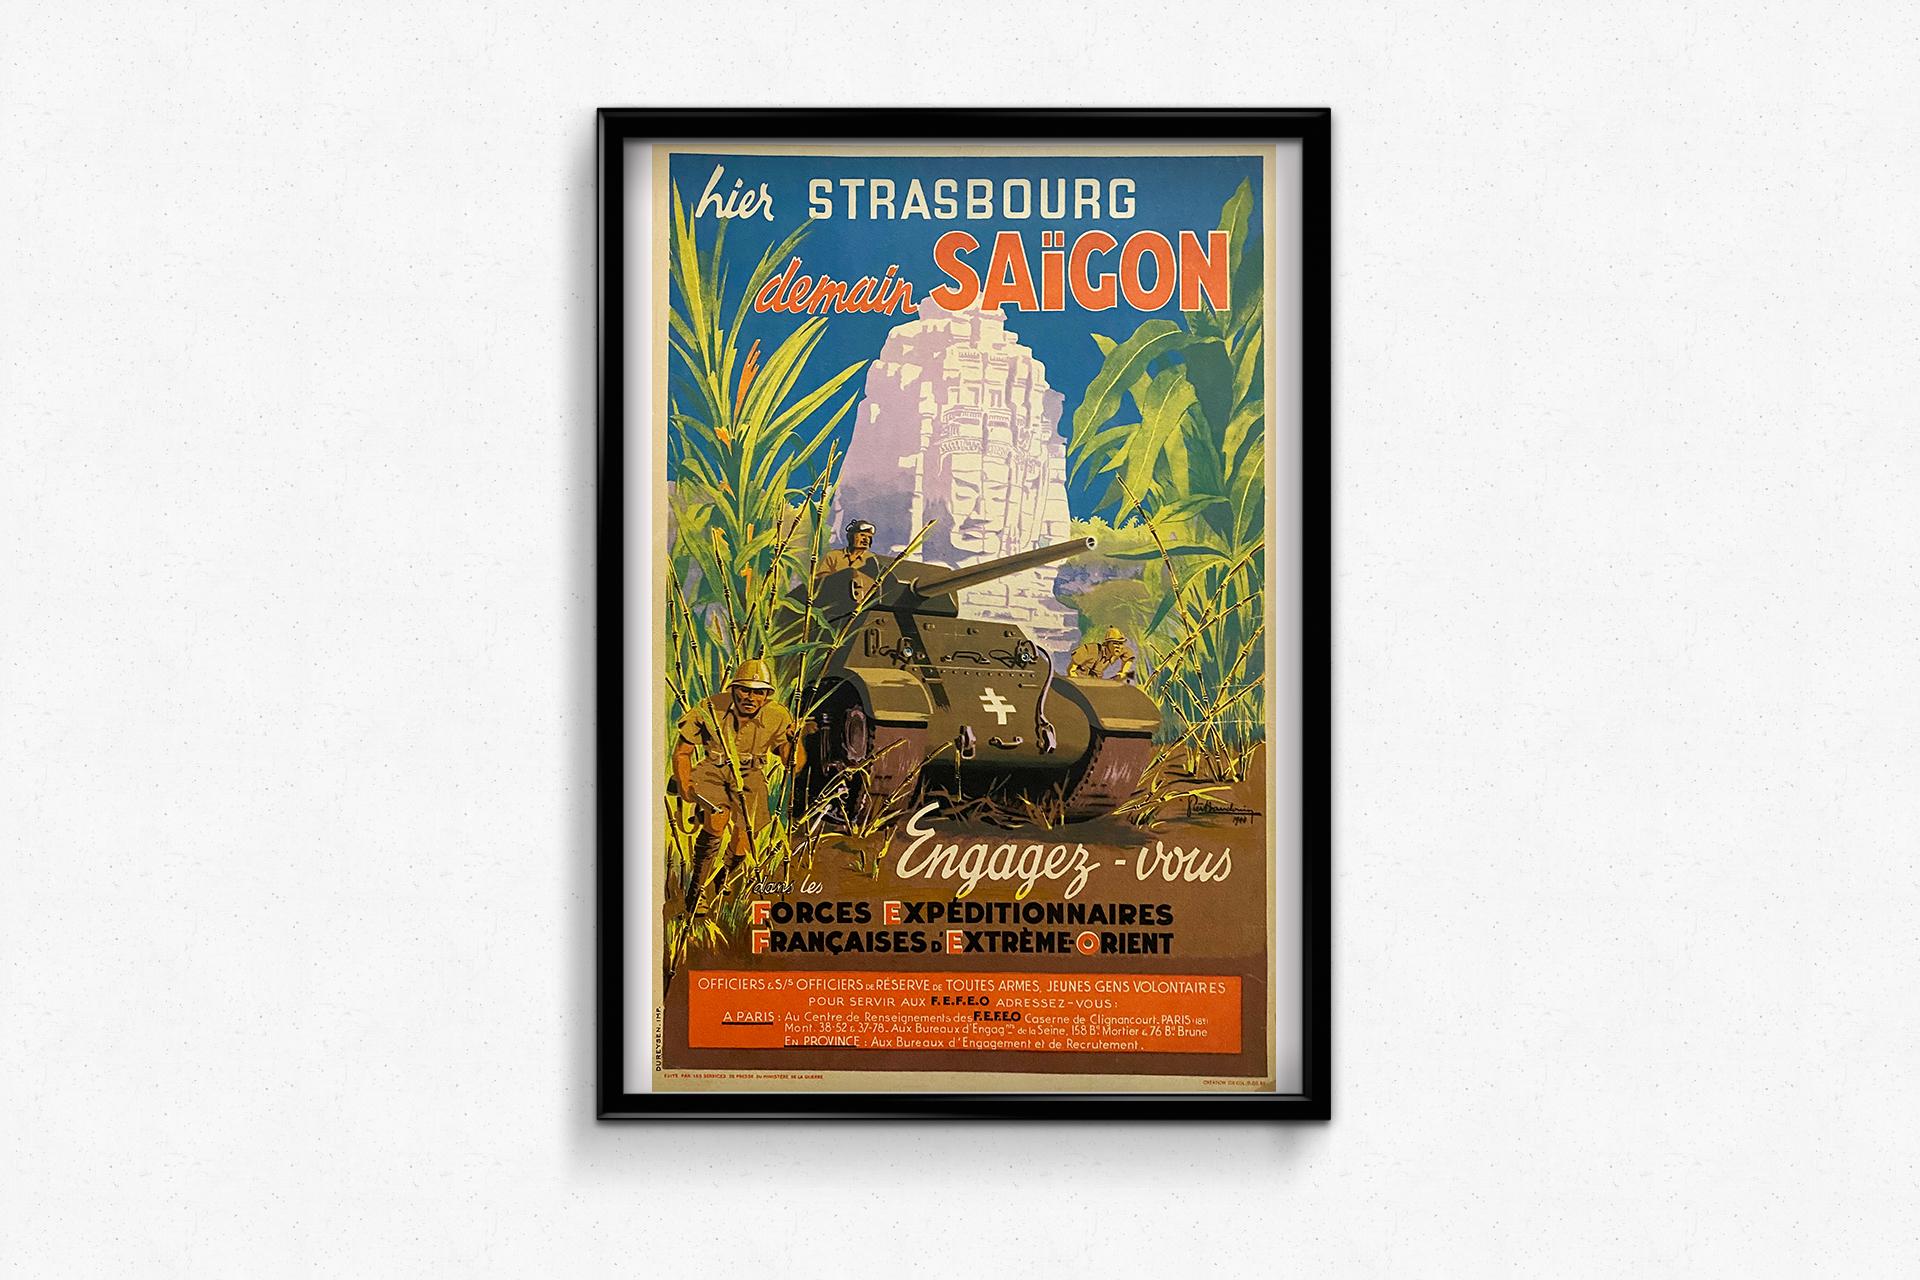 original poster made in 1944 by P. Baudouin Hier Strasbourg demain Saigon For Sale 1